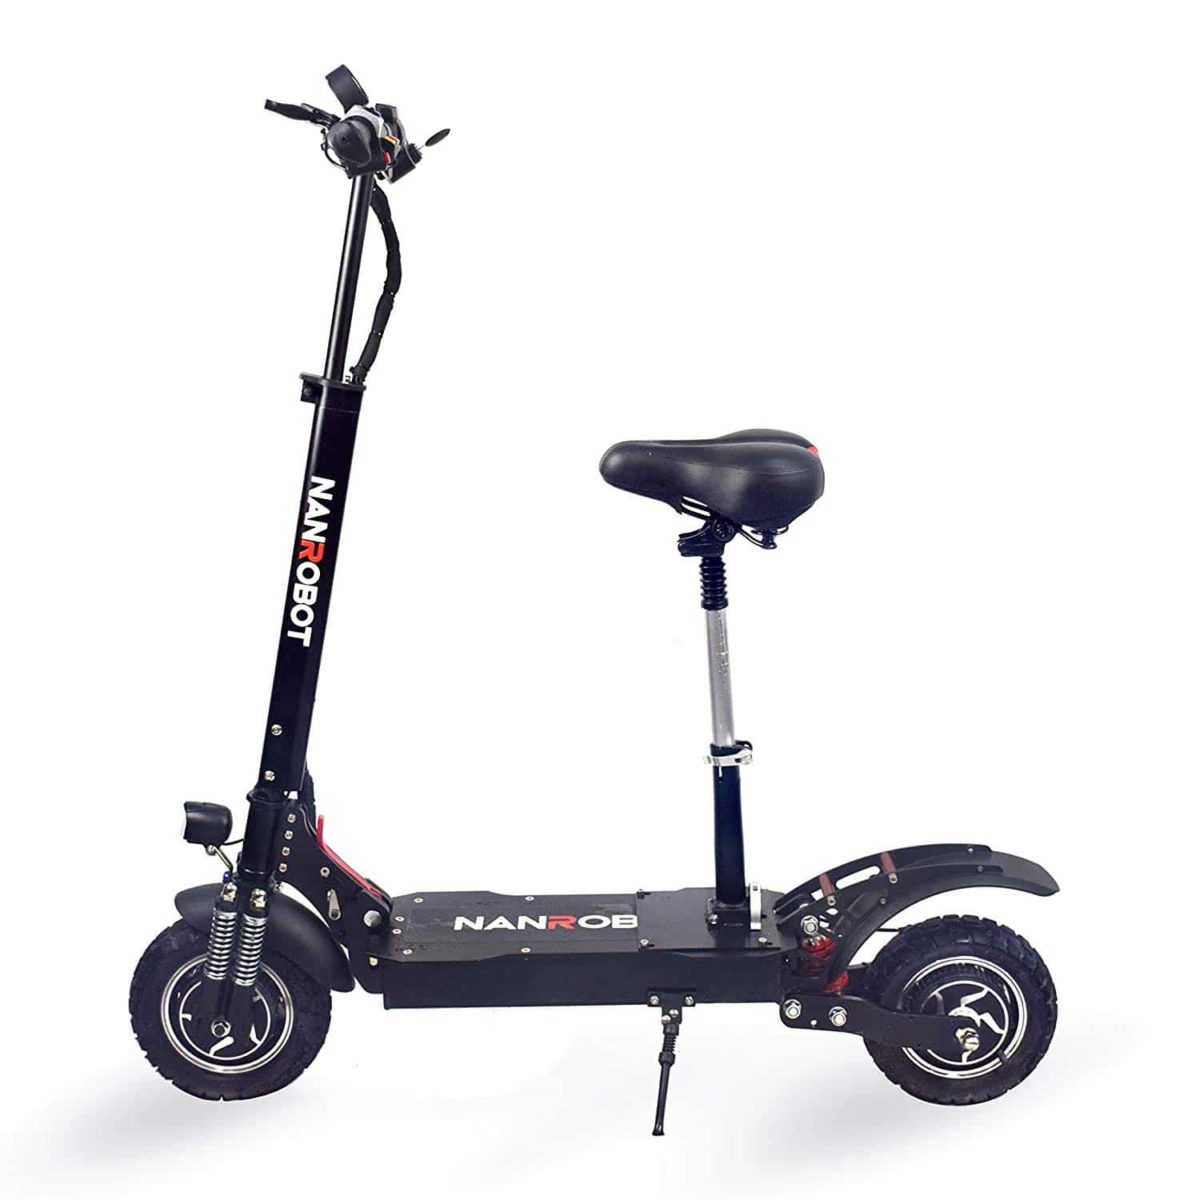 best electric scooter with seat